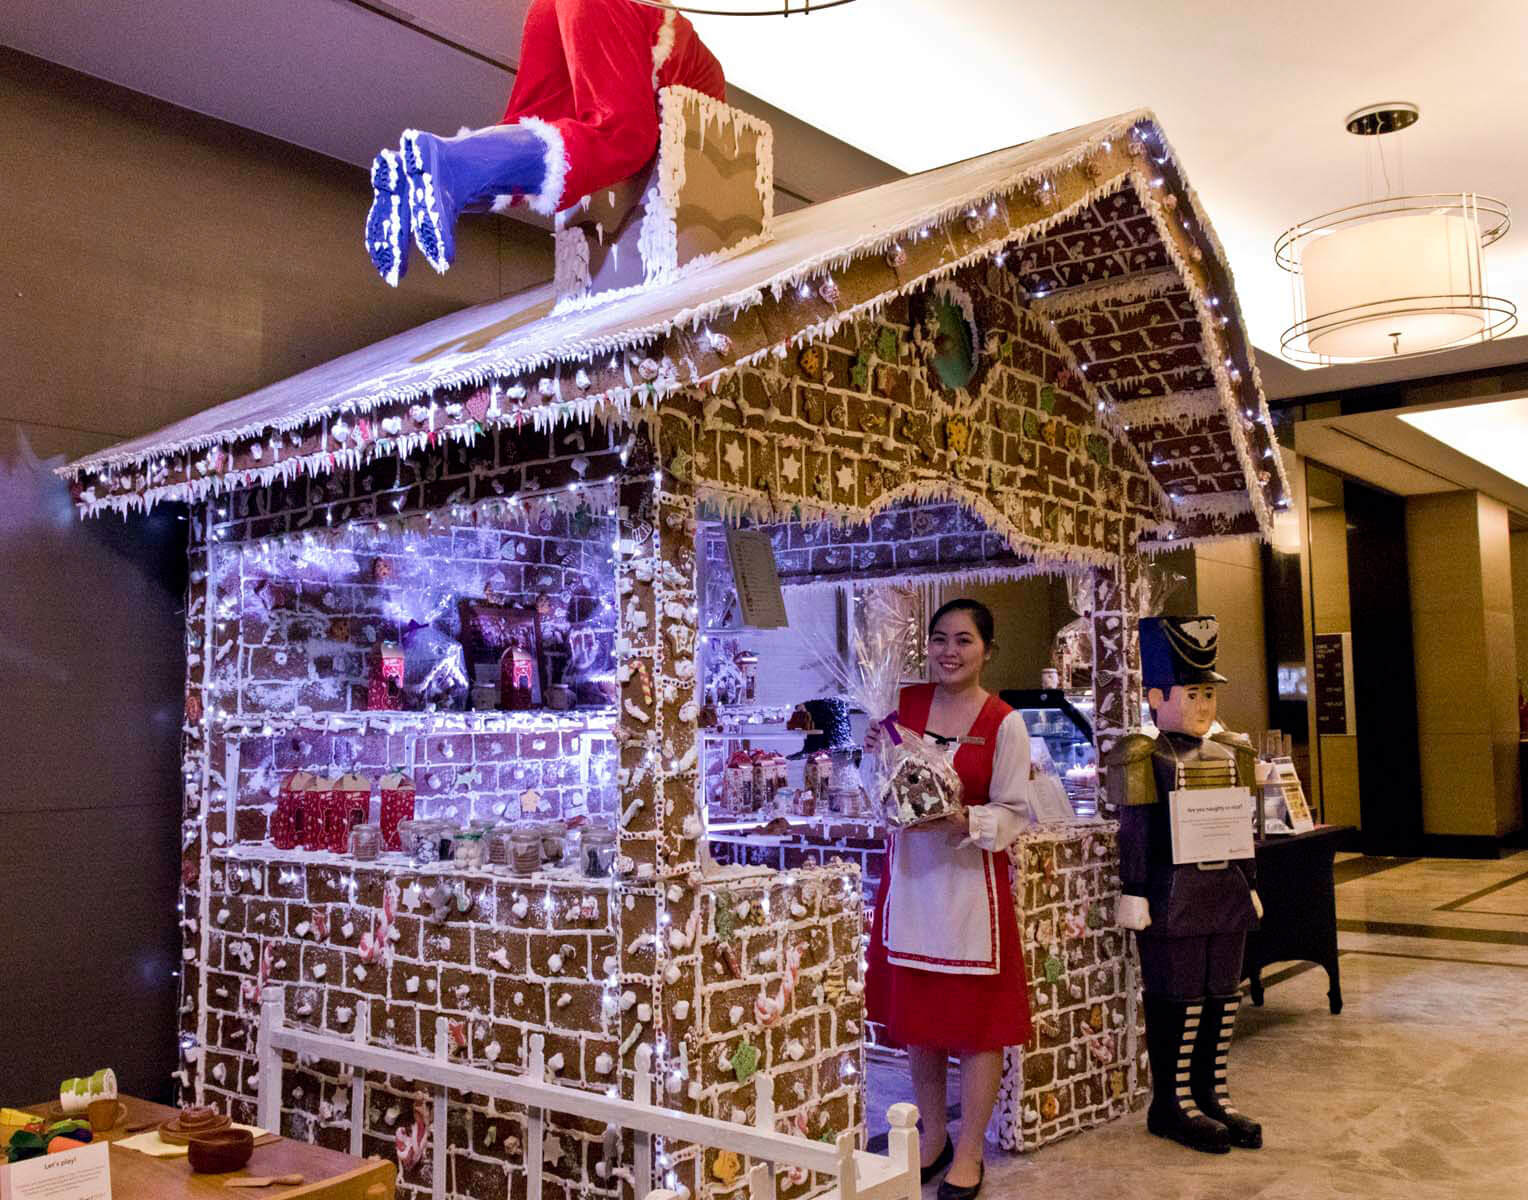 Hansel & Gretel’s House is a life-size gingerbread house delightfully and deliciously covered using real sweets and candies, where guests may choose and shop for holiday pastries including ube ensaymada, fruitcake, stollen, panettone, banana loaf, rum cake, cookies, crinkles and more.